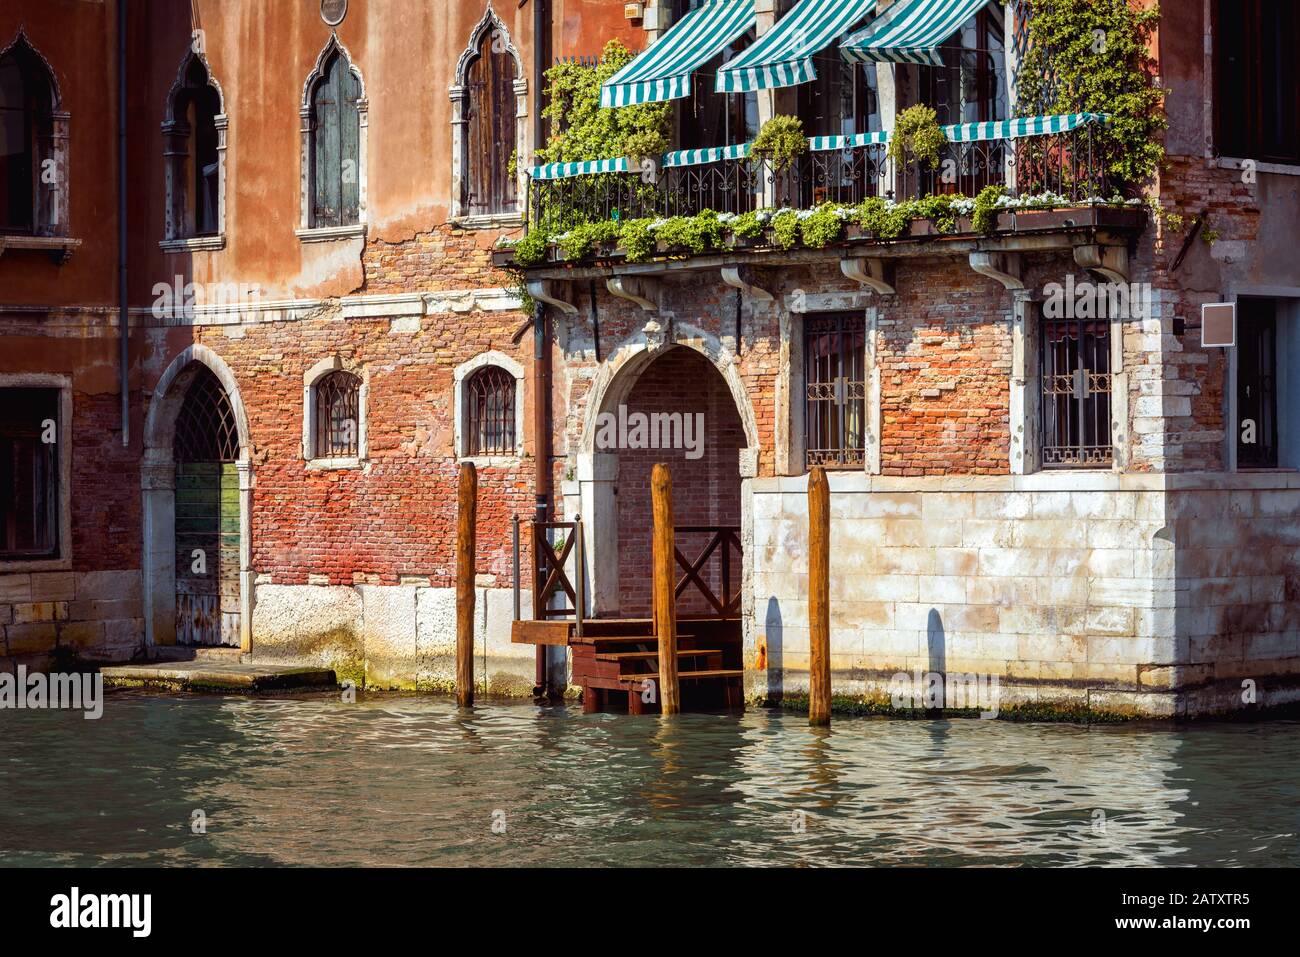 Vintage house, Venice, Italy. Entrance to residential house or hotel by Grand Canal, famous street of Venice. Old building on water, traditional view Stock Photo